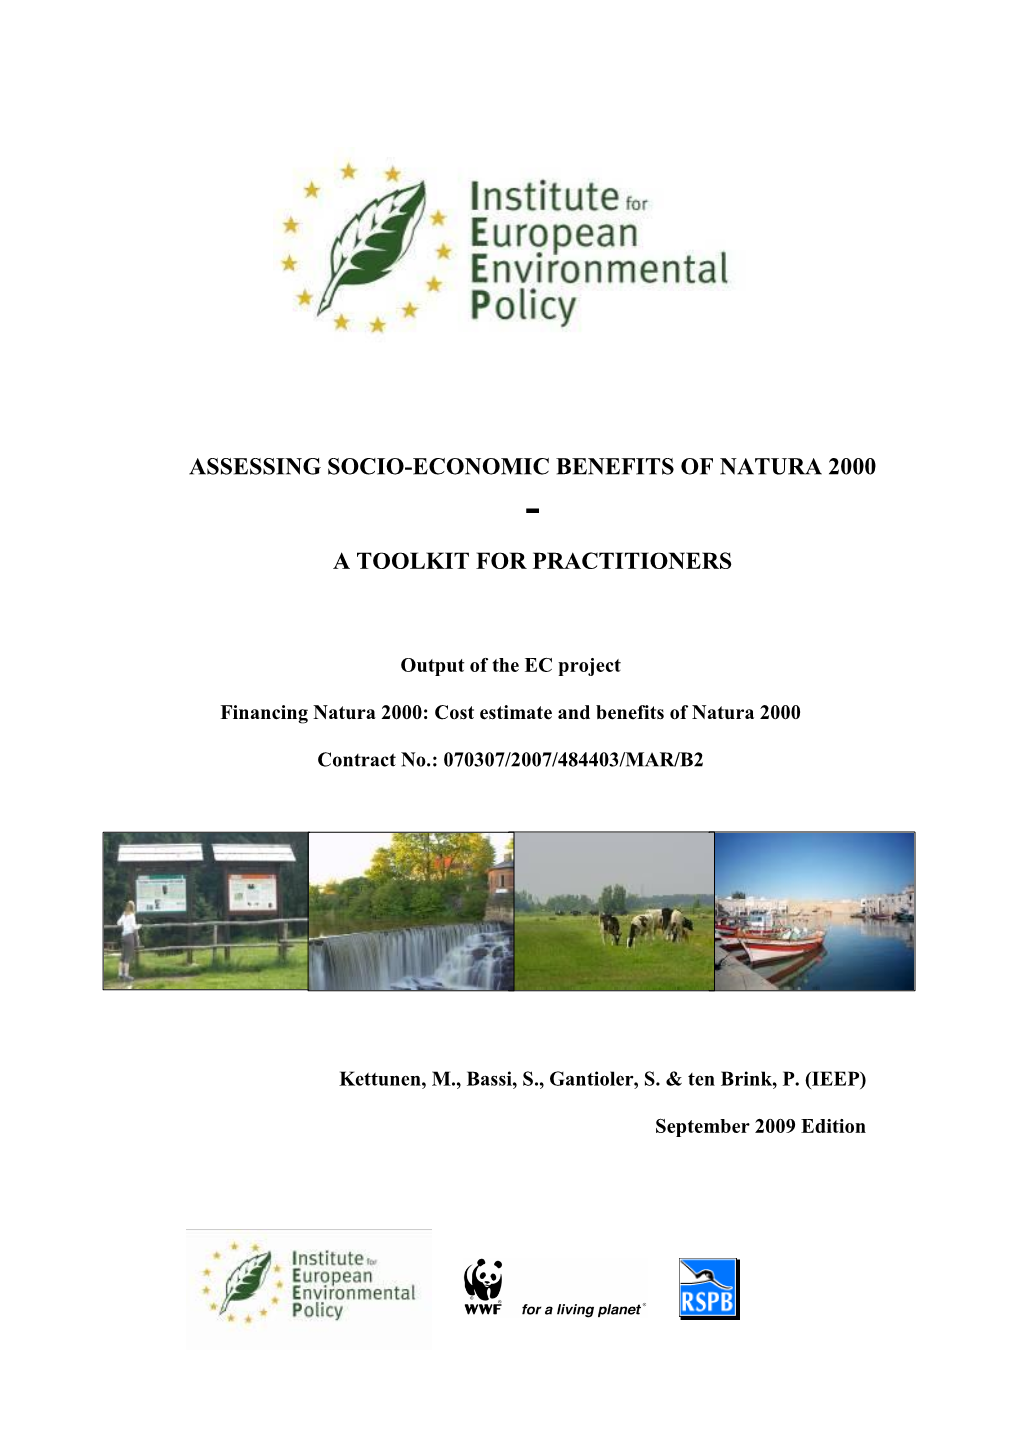 Assessing Socio-Economic Benefits of Natura 2000: a Toolkit for Practitioners